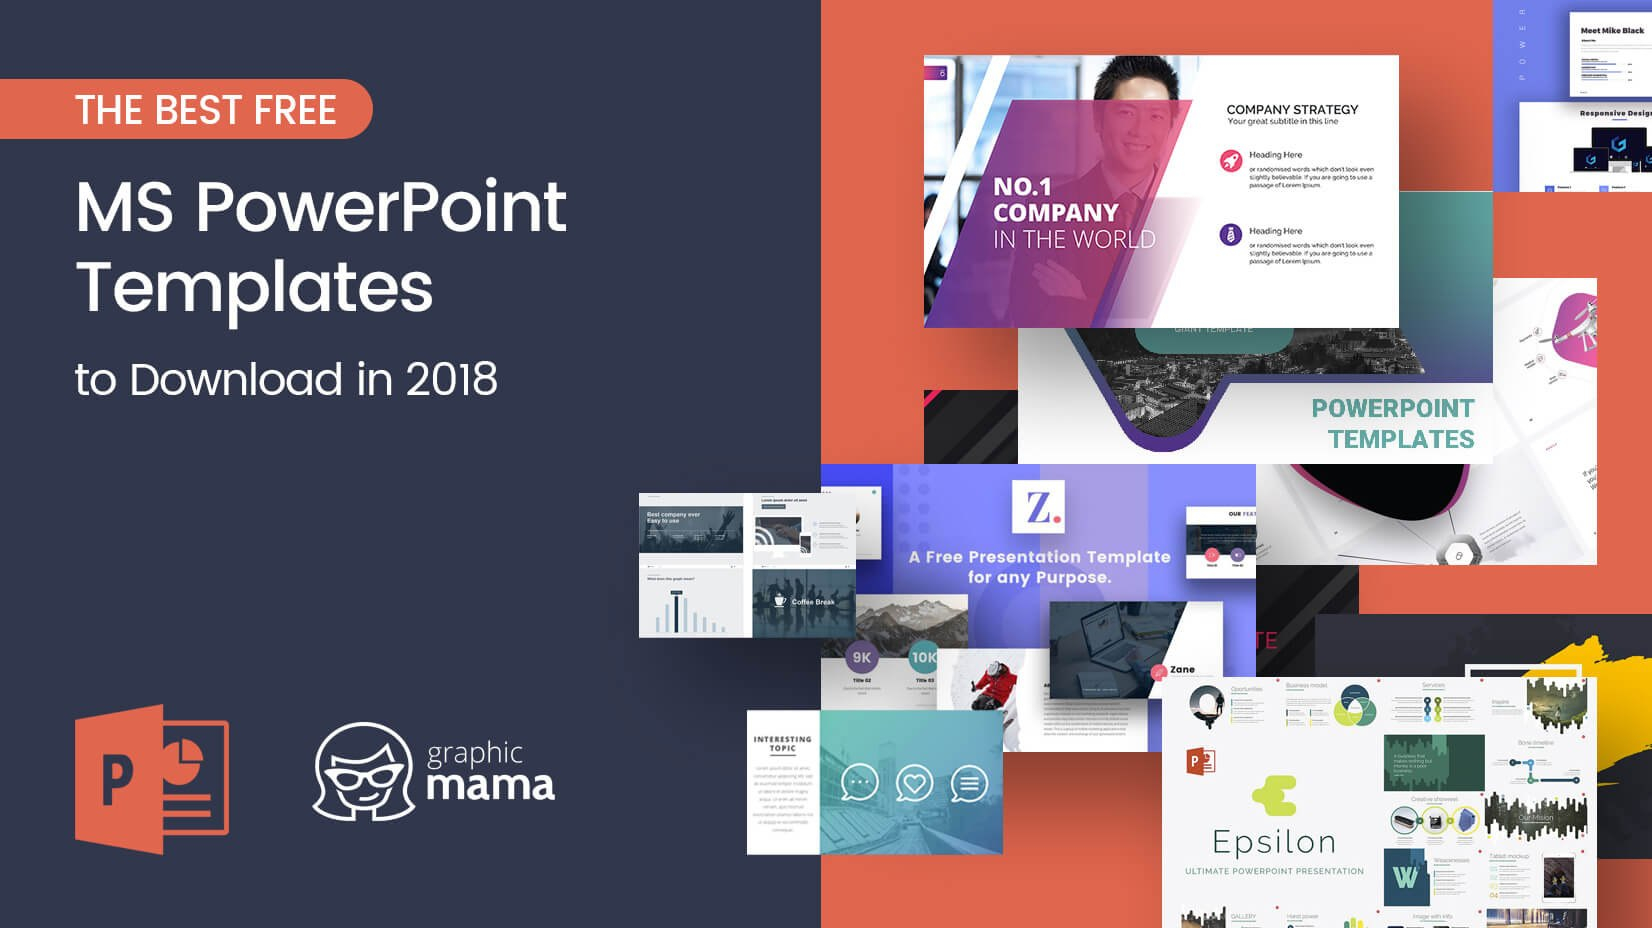 The Best Free Powerpoint Templates To Download In   Graphicmama pertaining to Powerpoint Slides Design Templates For Free